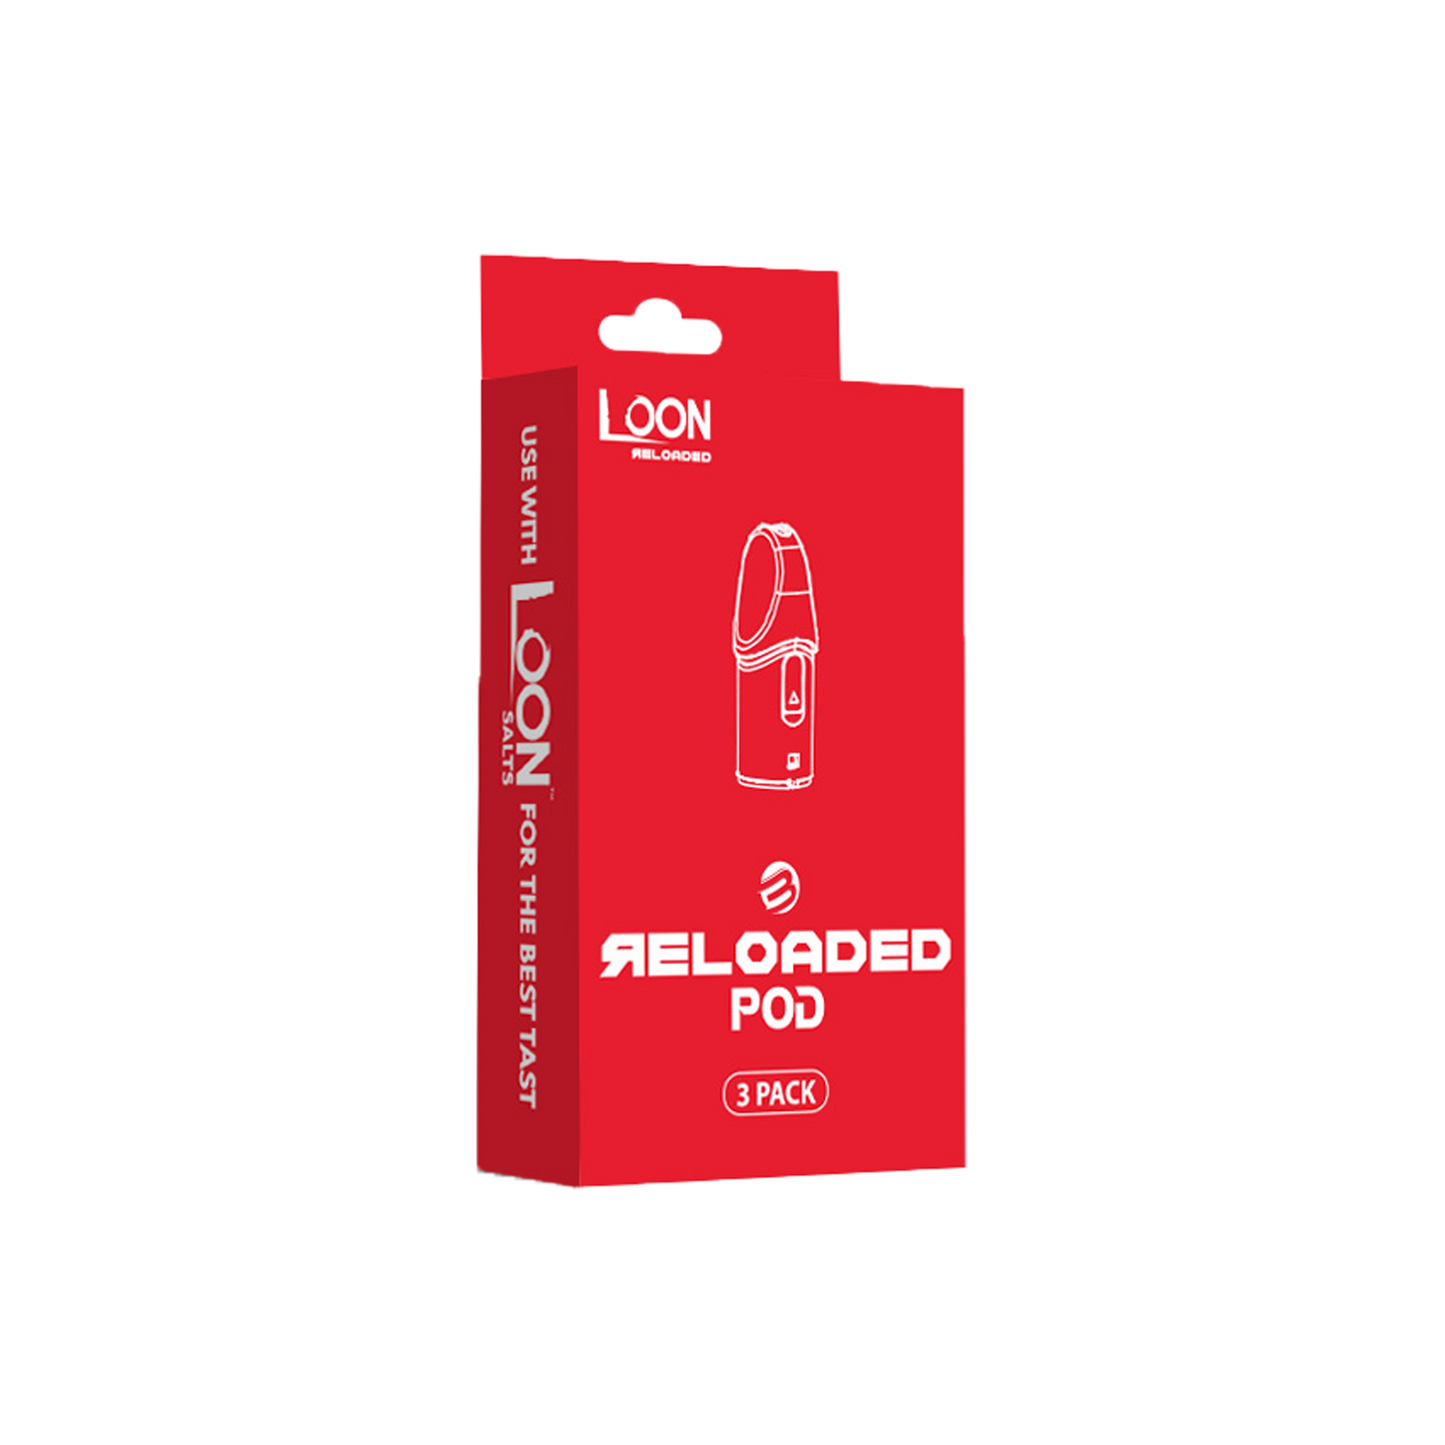 LOON RELOADED PODS - 3 PACK